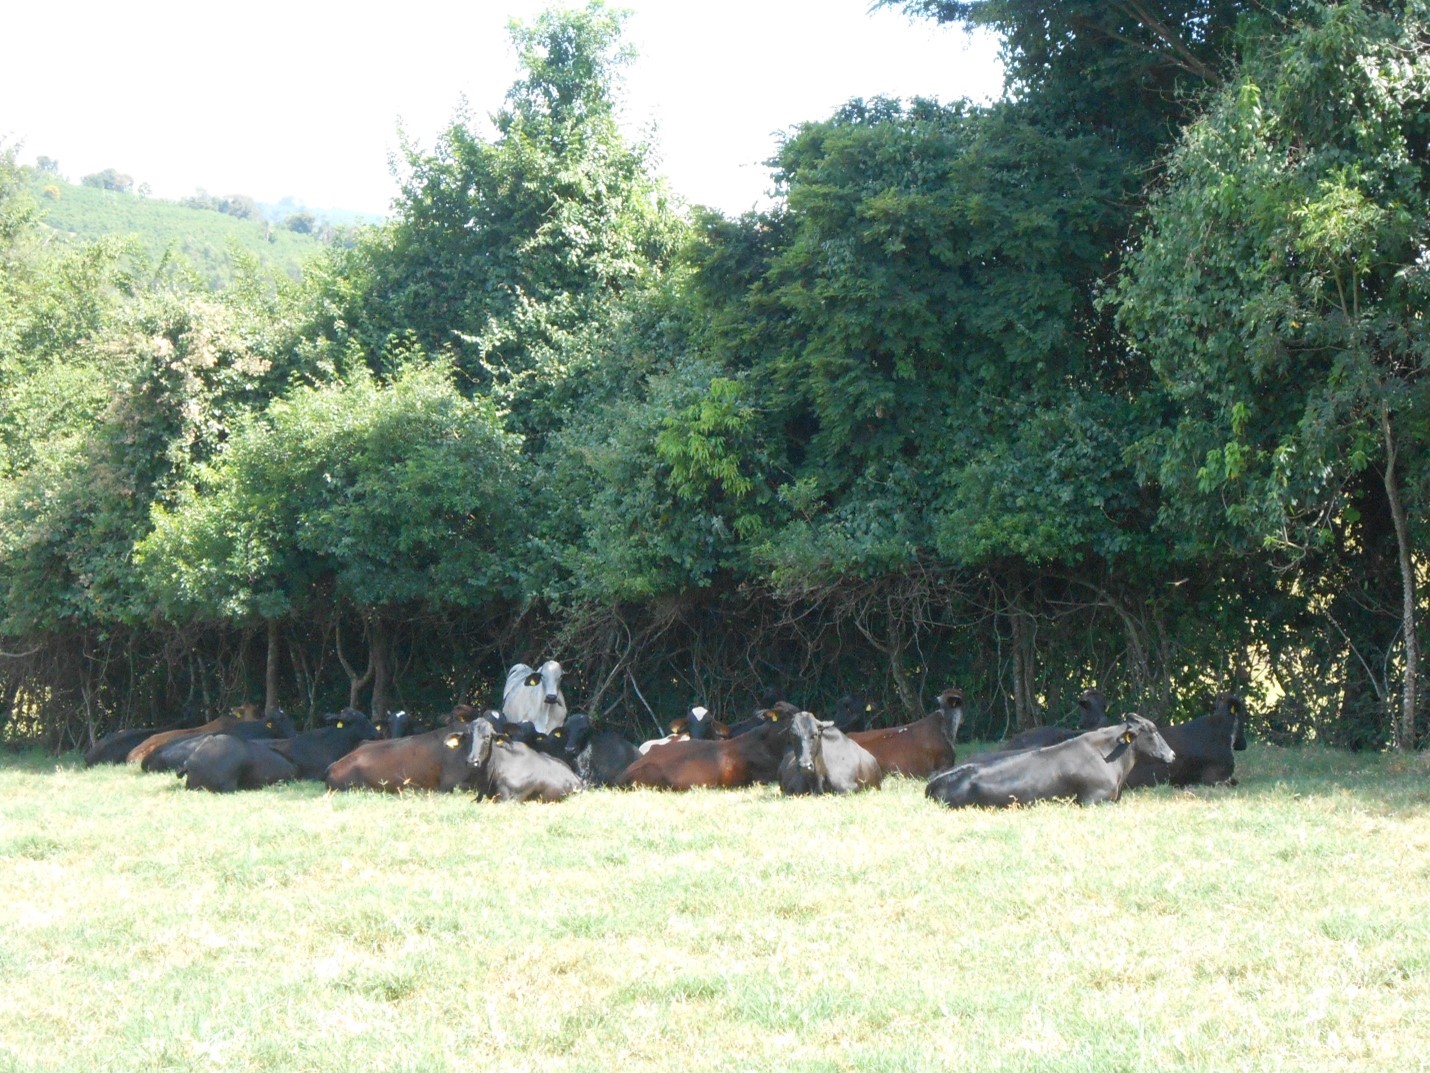 Dairy cattle grazing under the shade